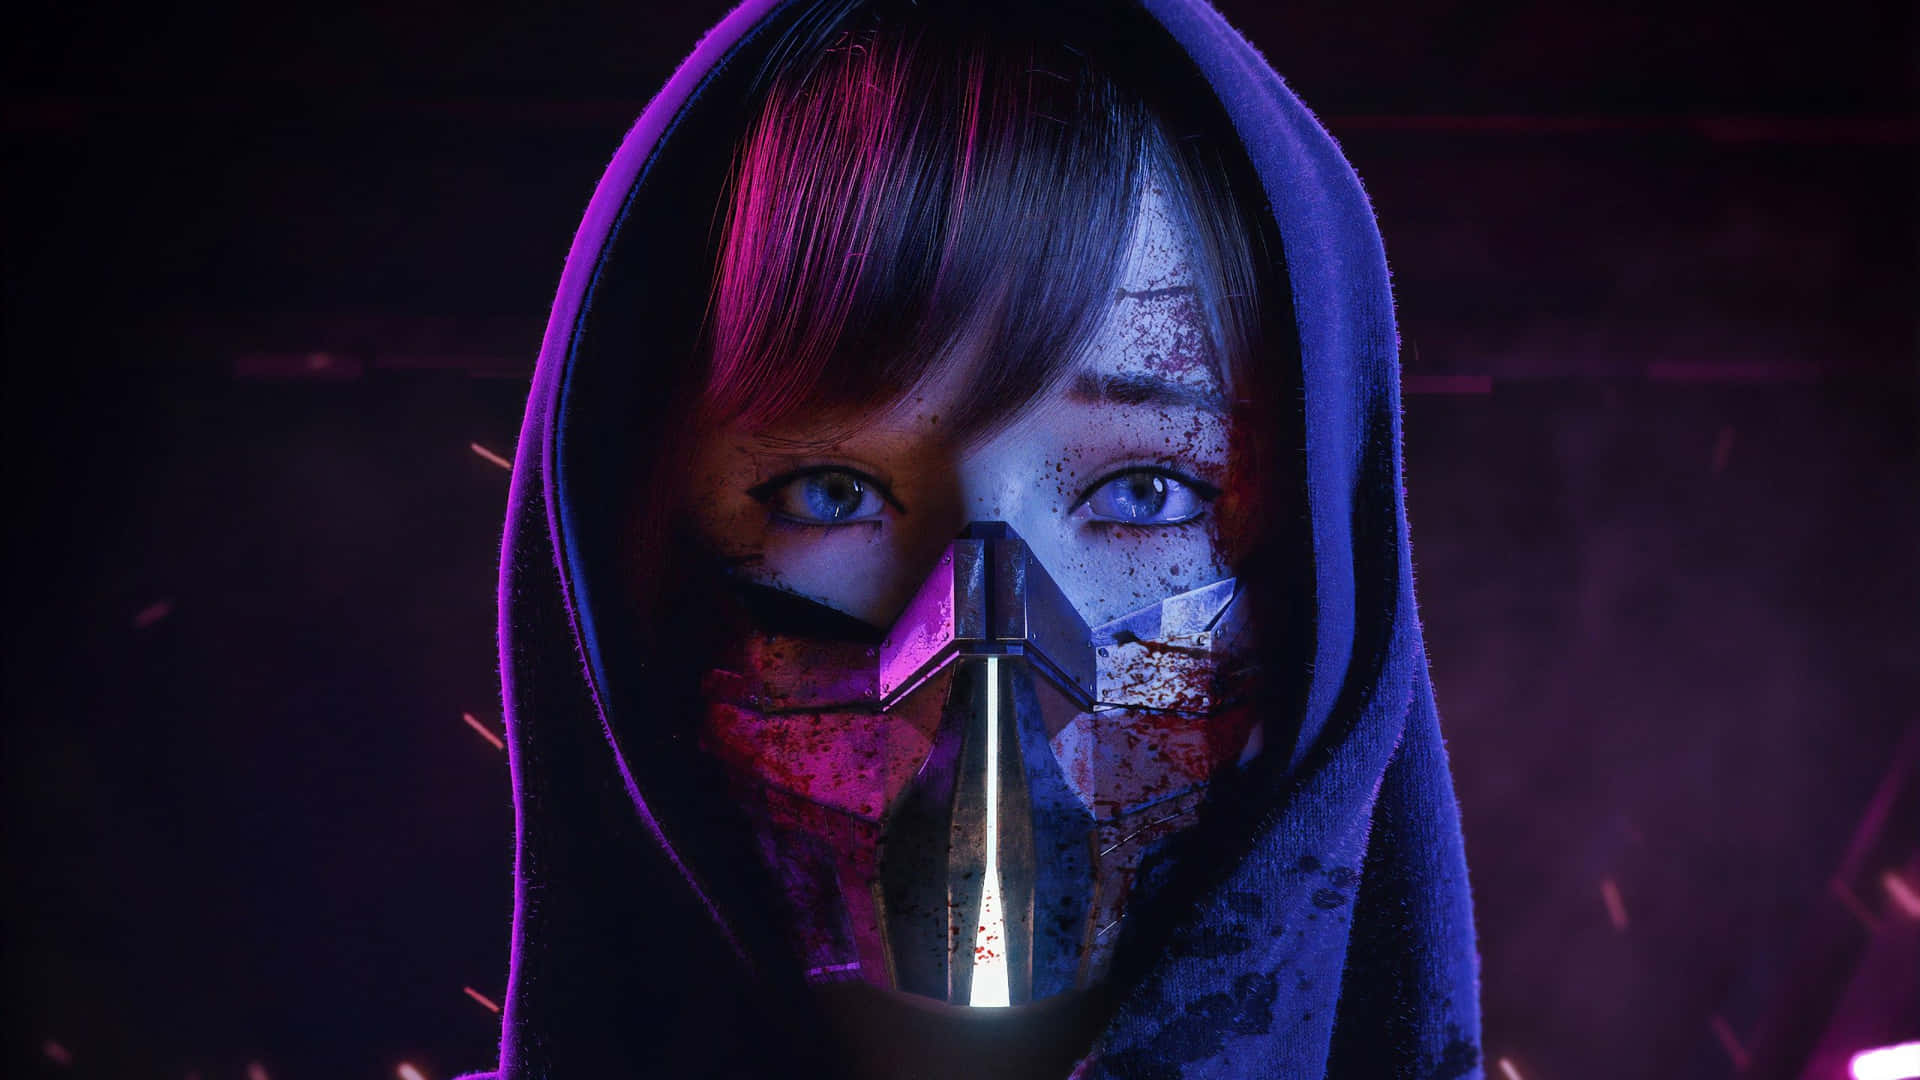 A Girl In A Hoodie With A Mask On